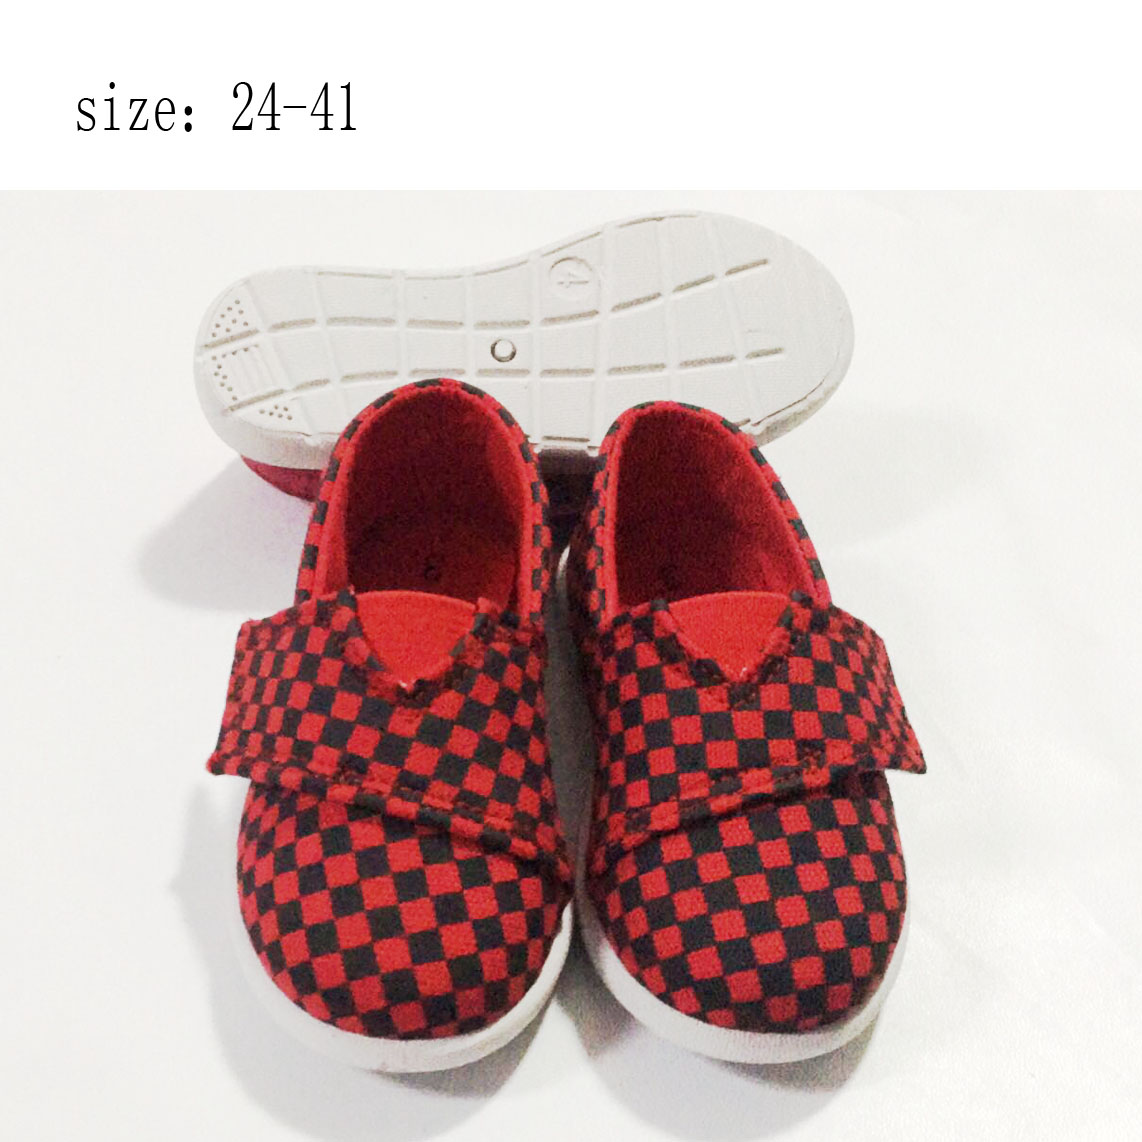 New design women casual shoes canvas shoes (HP19517-4) 1. ITEM...